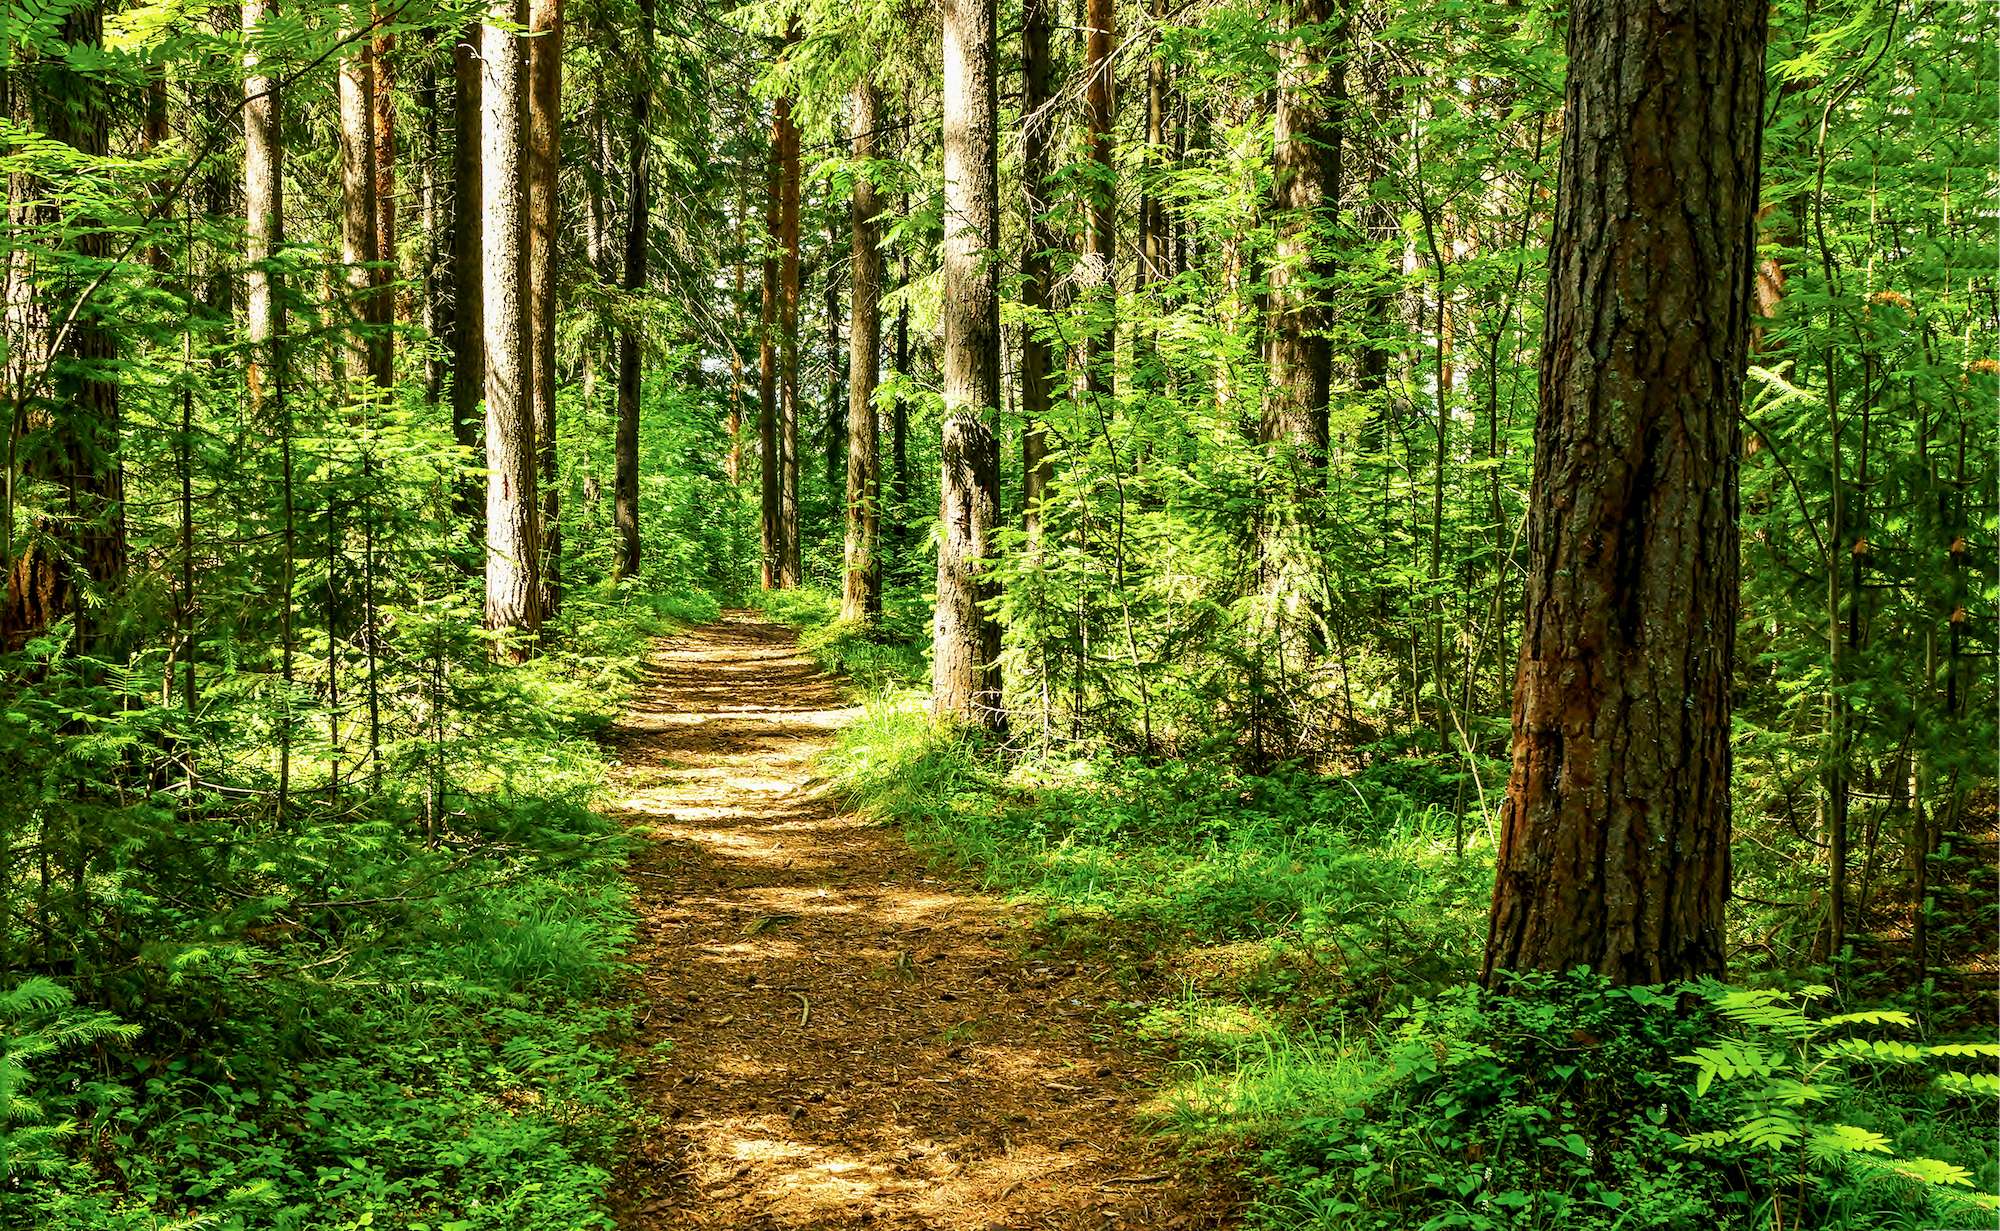 Trail lined with trees in a forest